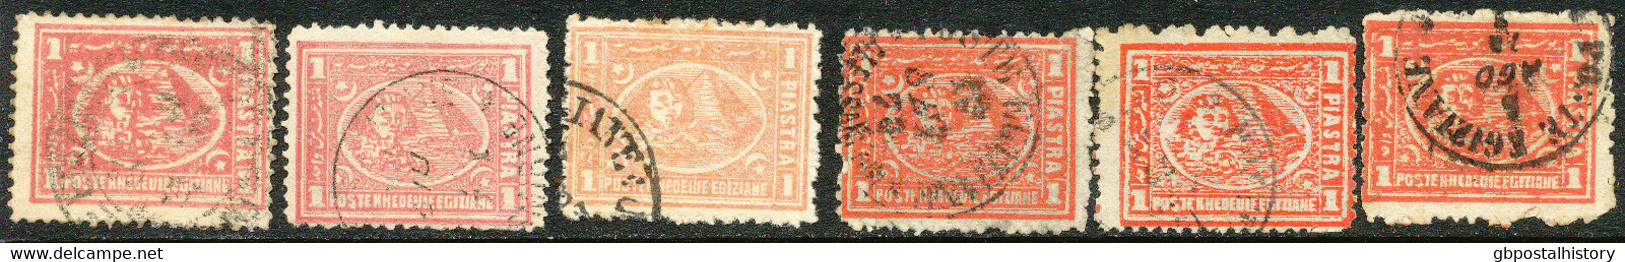 EGYPT 1872 Sphinx Before Cheopspyramide 1 Pia From Pink (3) To Brickred (11) VFU - 1866-1914 Khedivaat Egypte